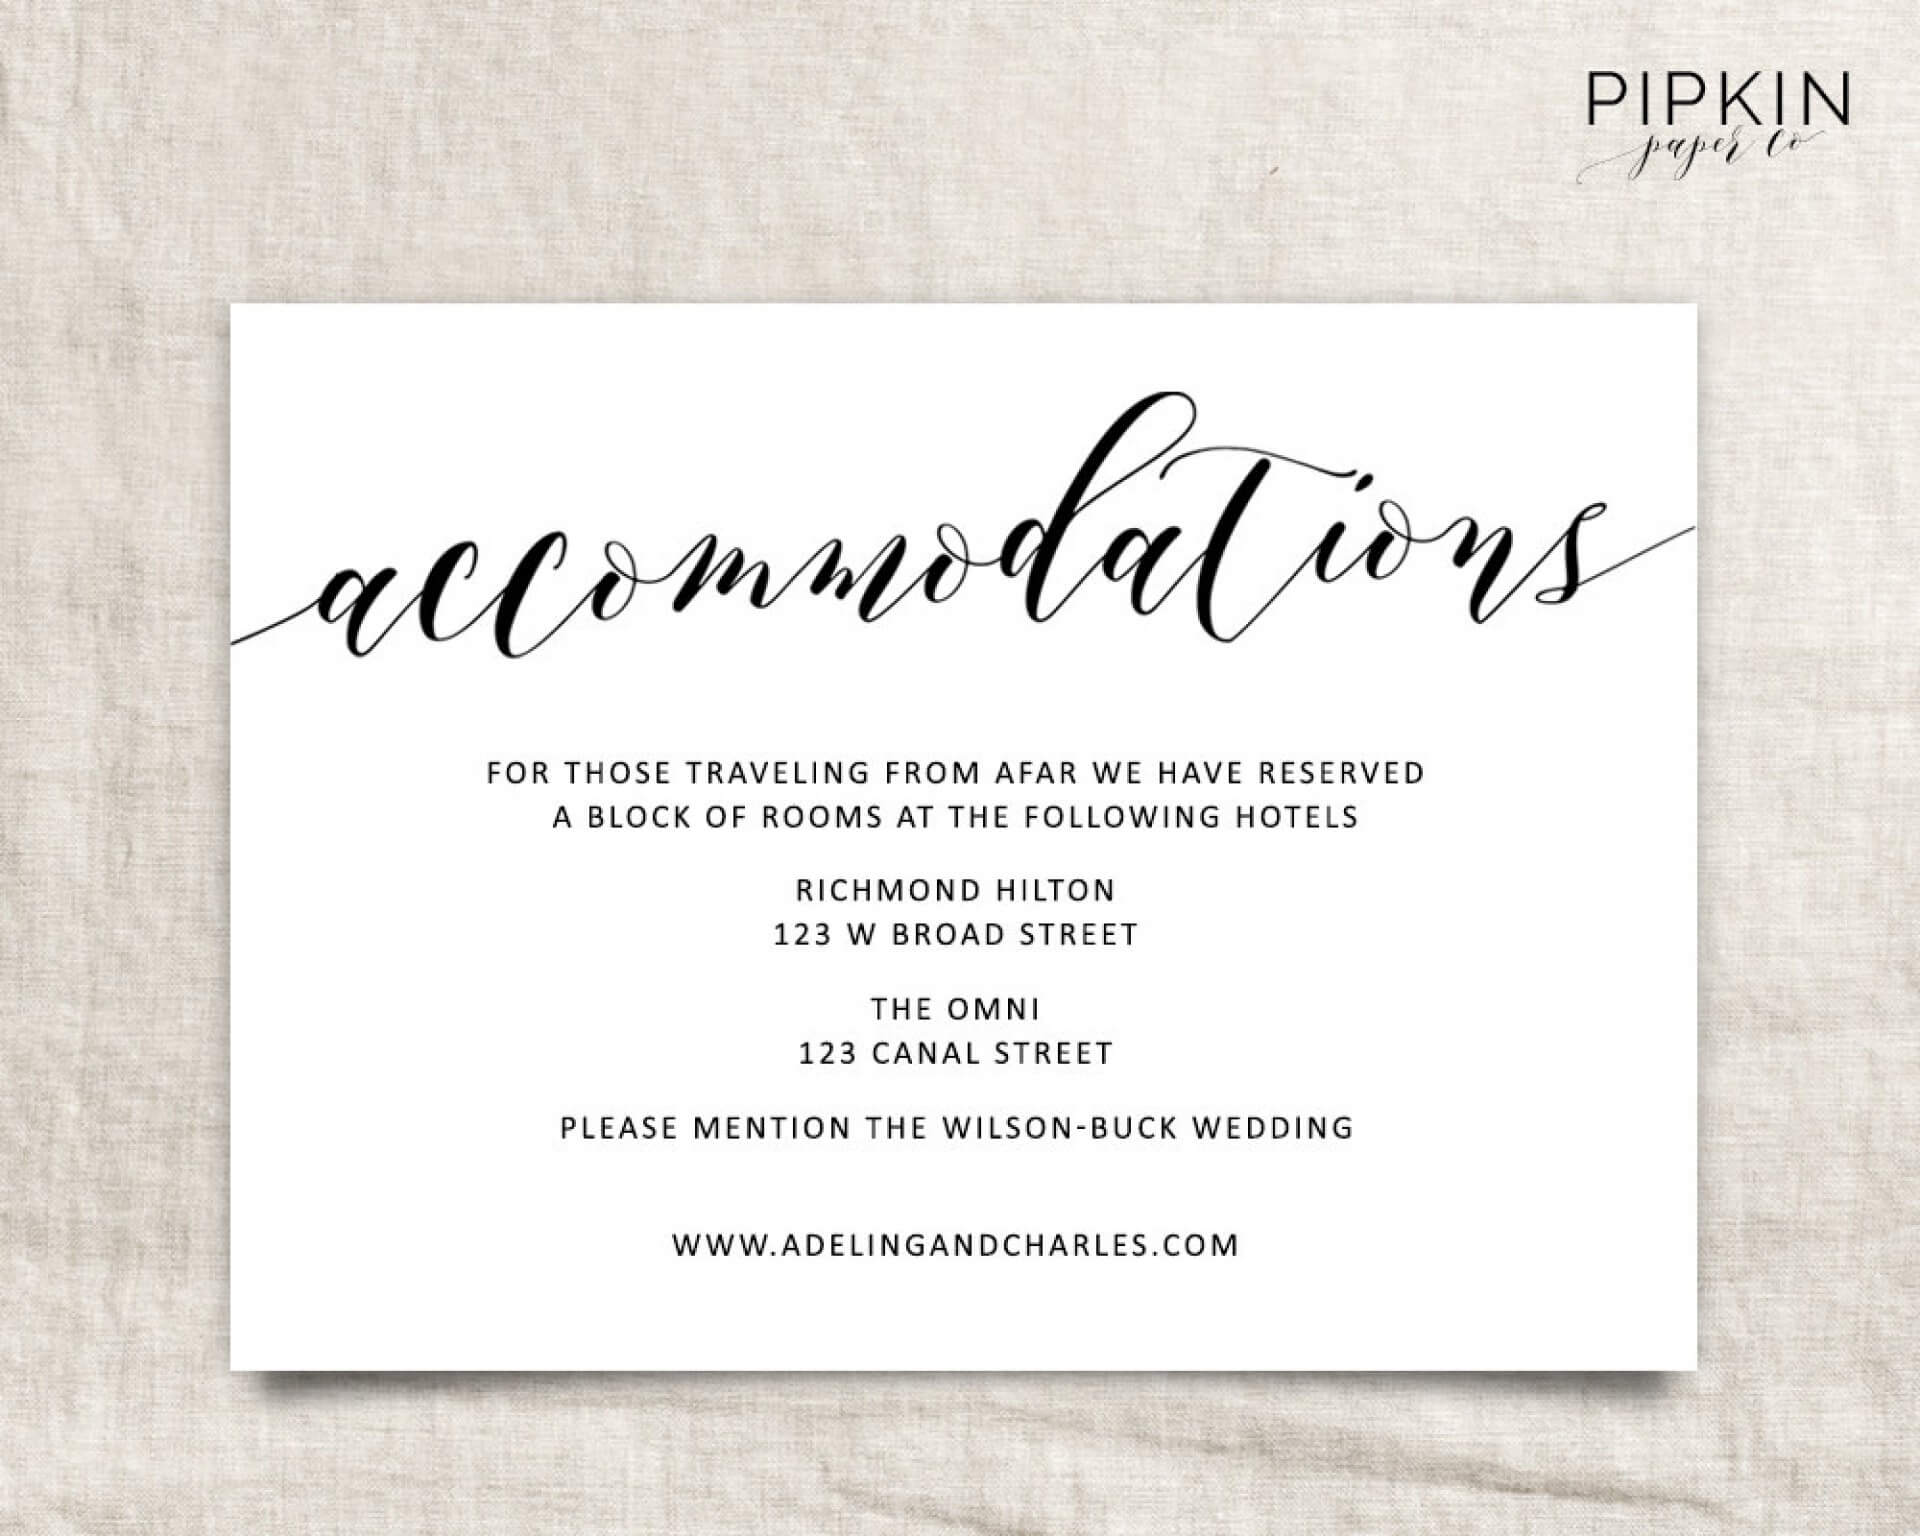 005 Free Wedding Accommodation Card Template Ideas Top Hotel With Regard To Wedding Hotel Information Card Template